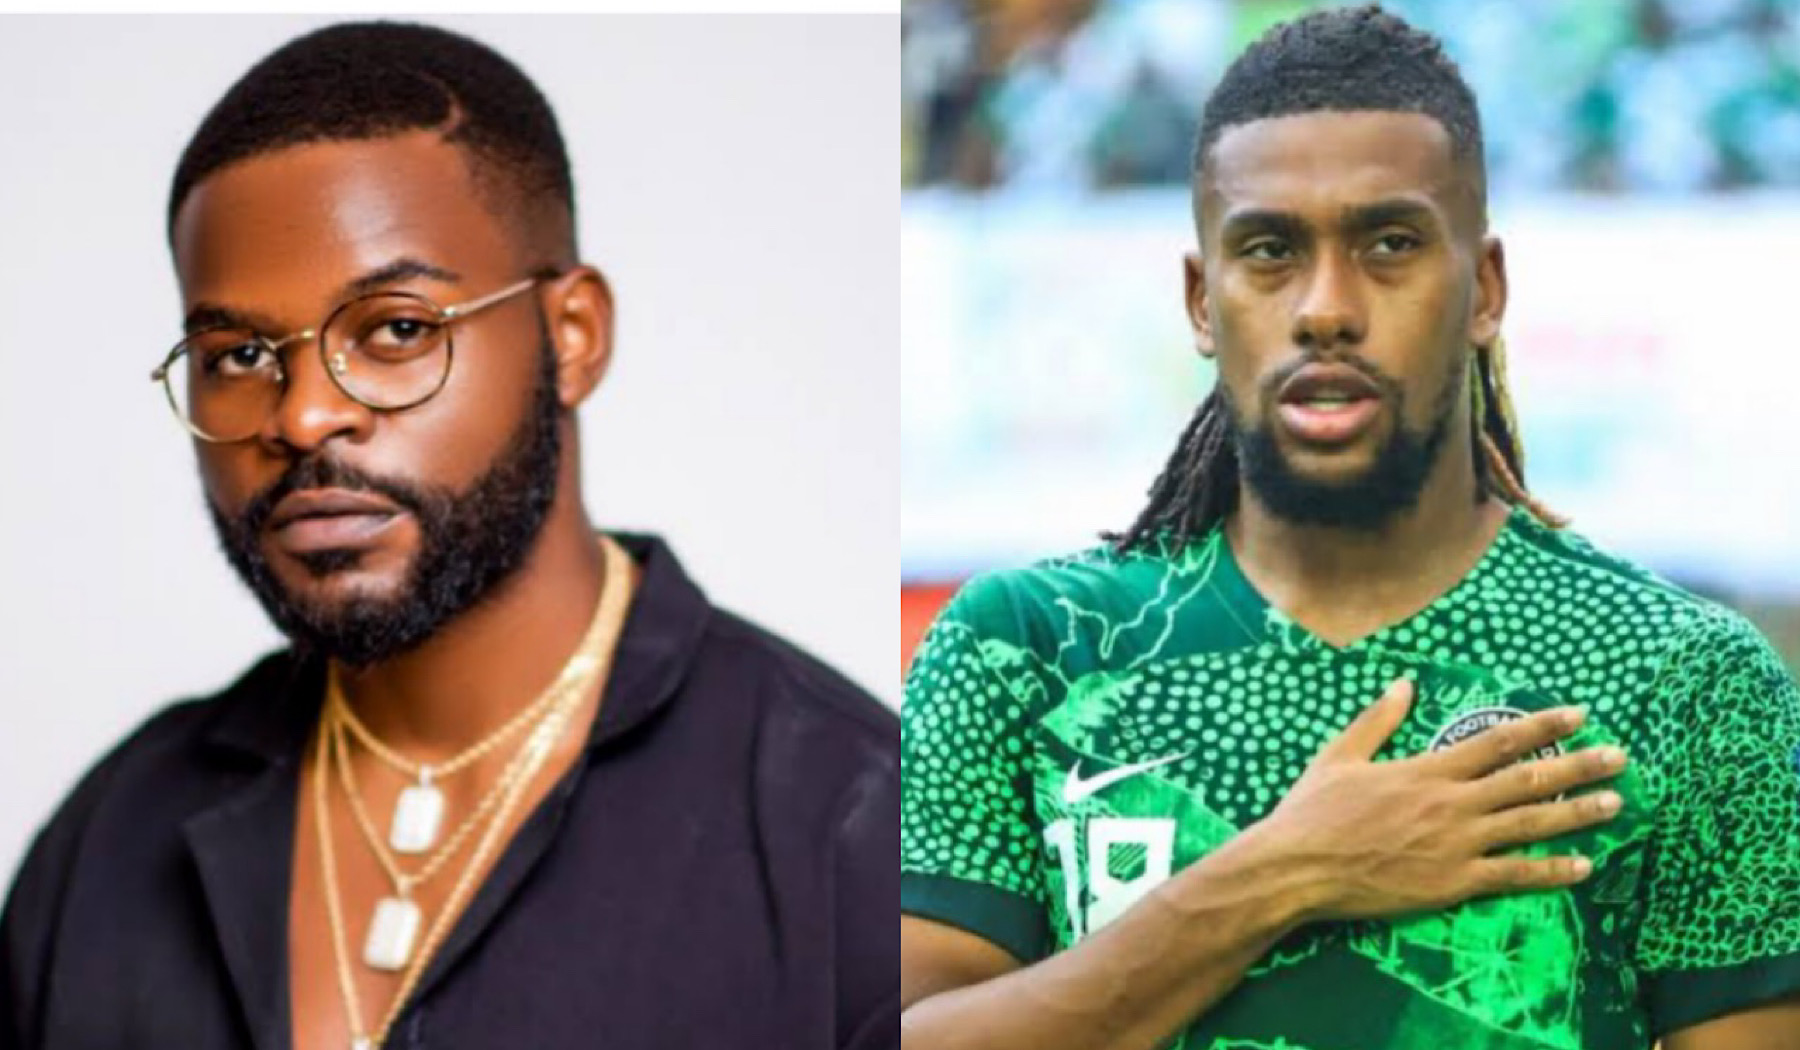 AFCON: Singer Falz Defends Alex Iwobi, Criticizes Quickness to Turn Against Own Players